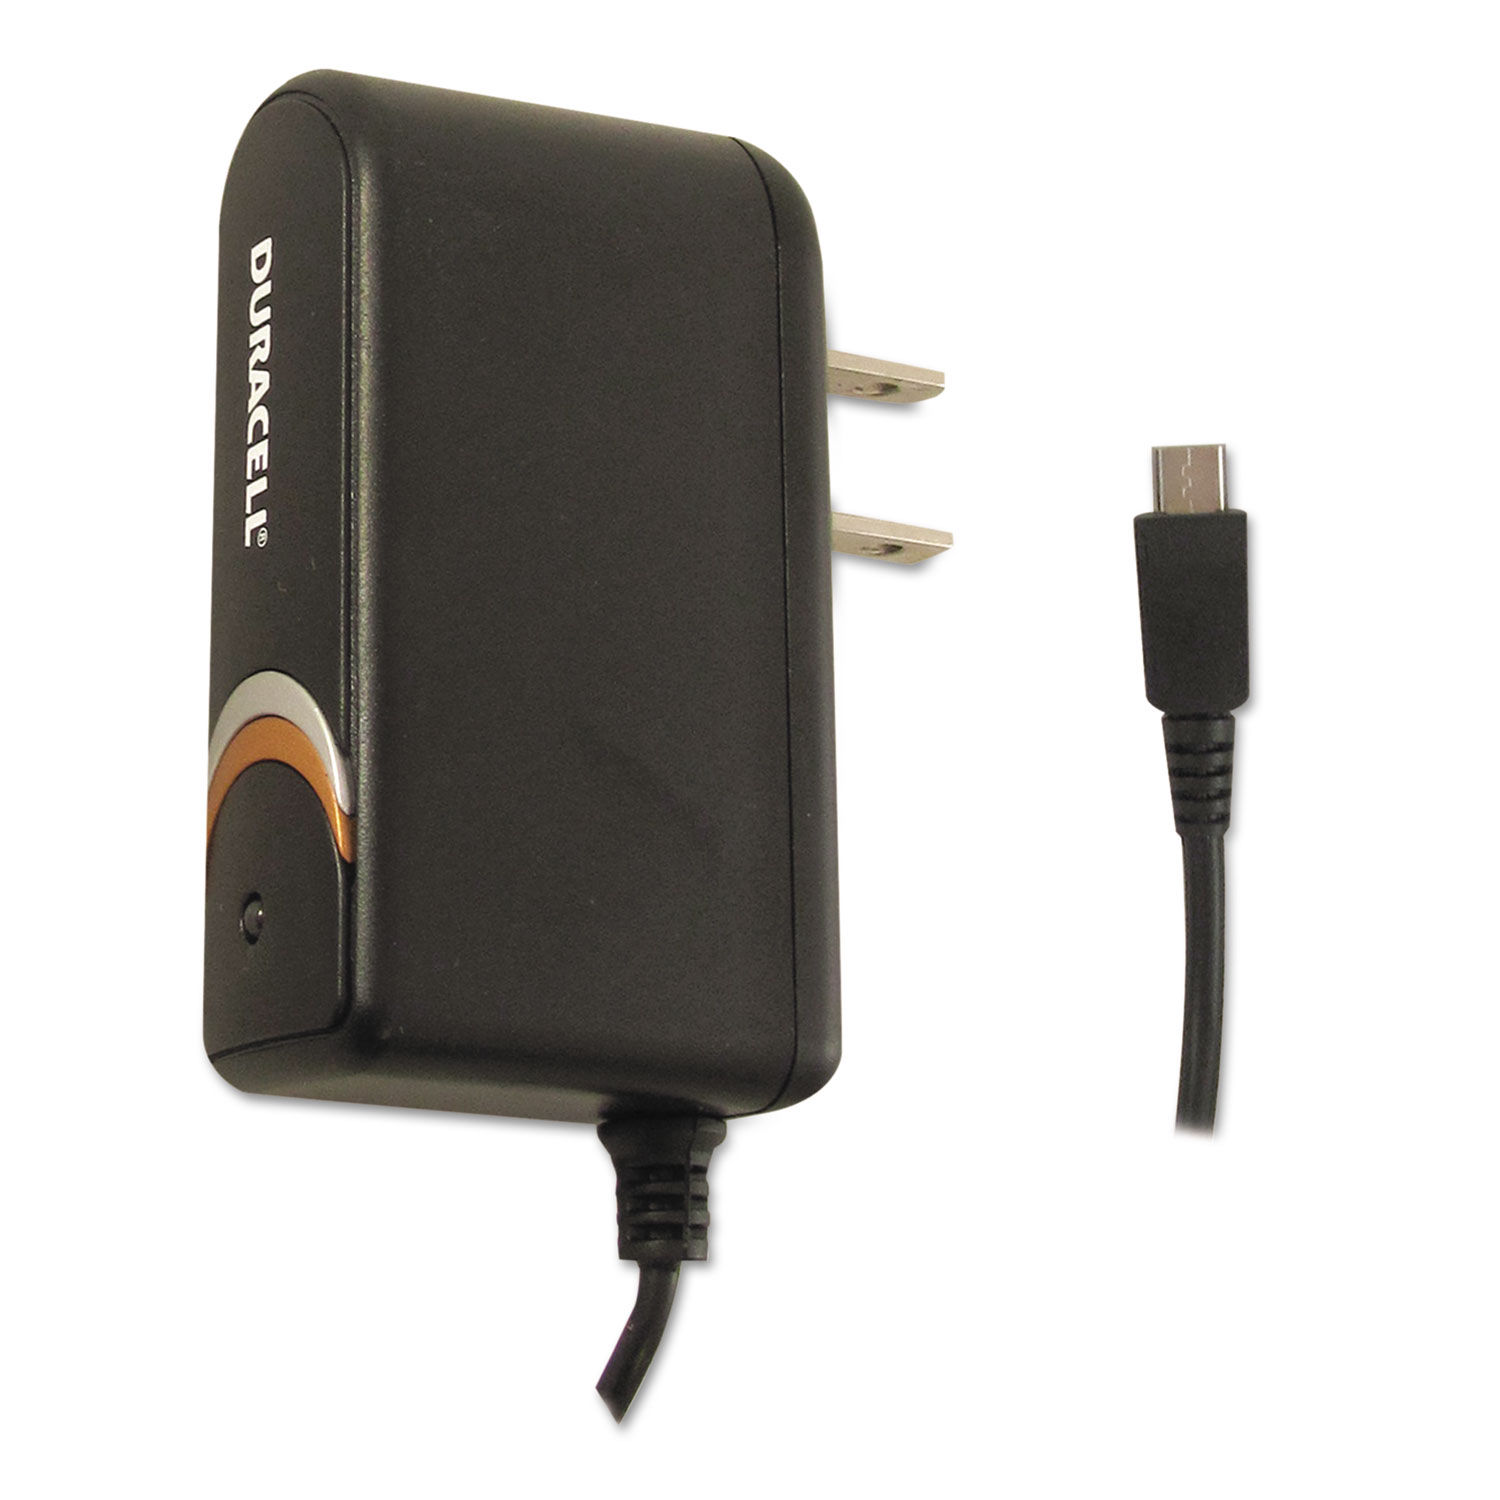 Hi Performance Wall Charger for Micro USB Devices